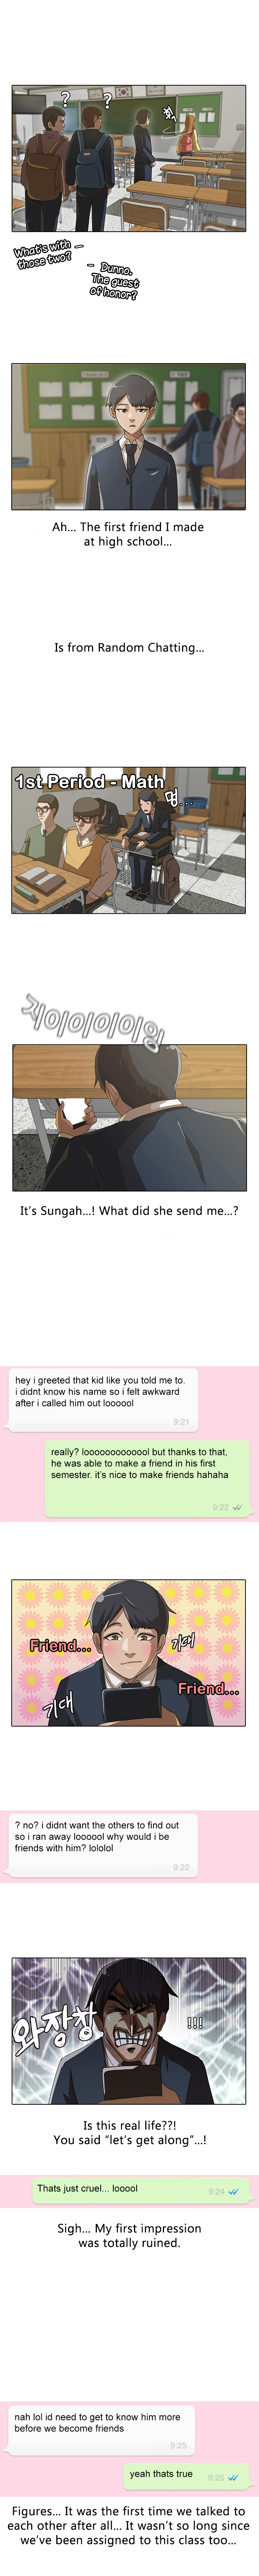 The Girl from Random Chatting! - 2 page 3